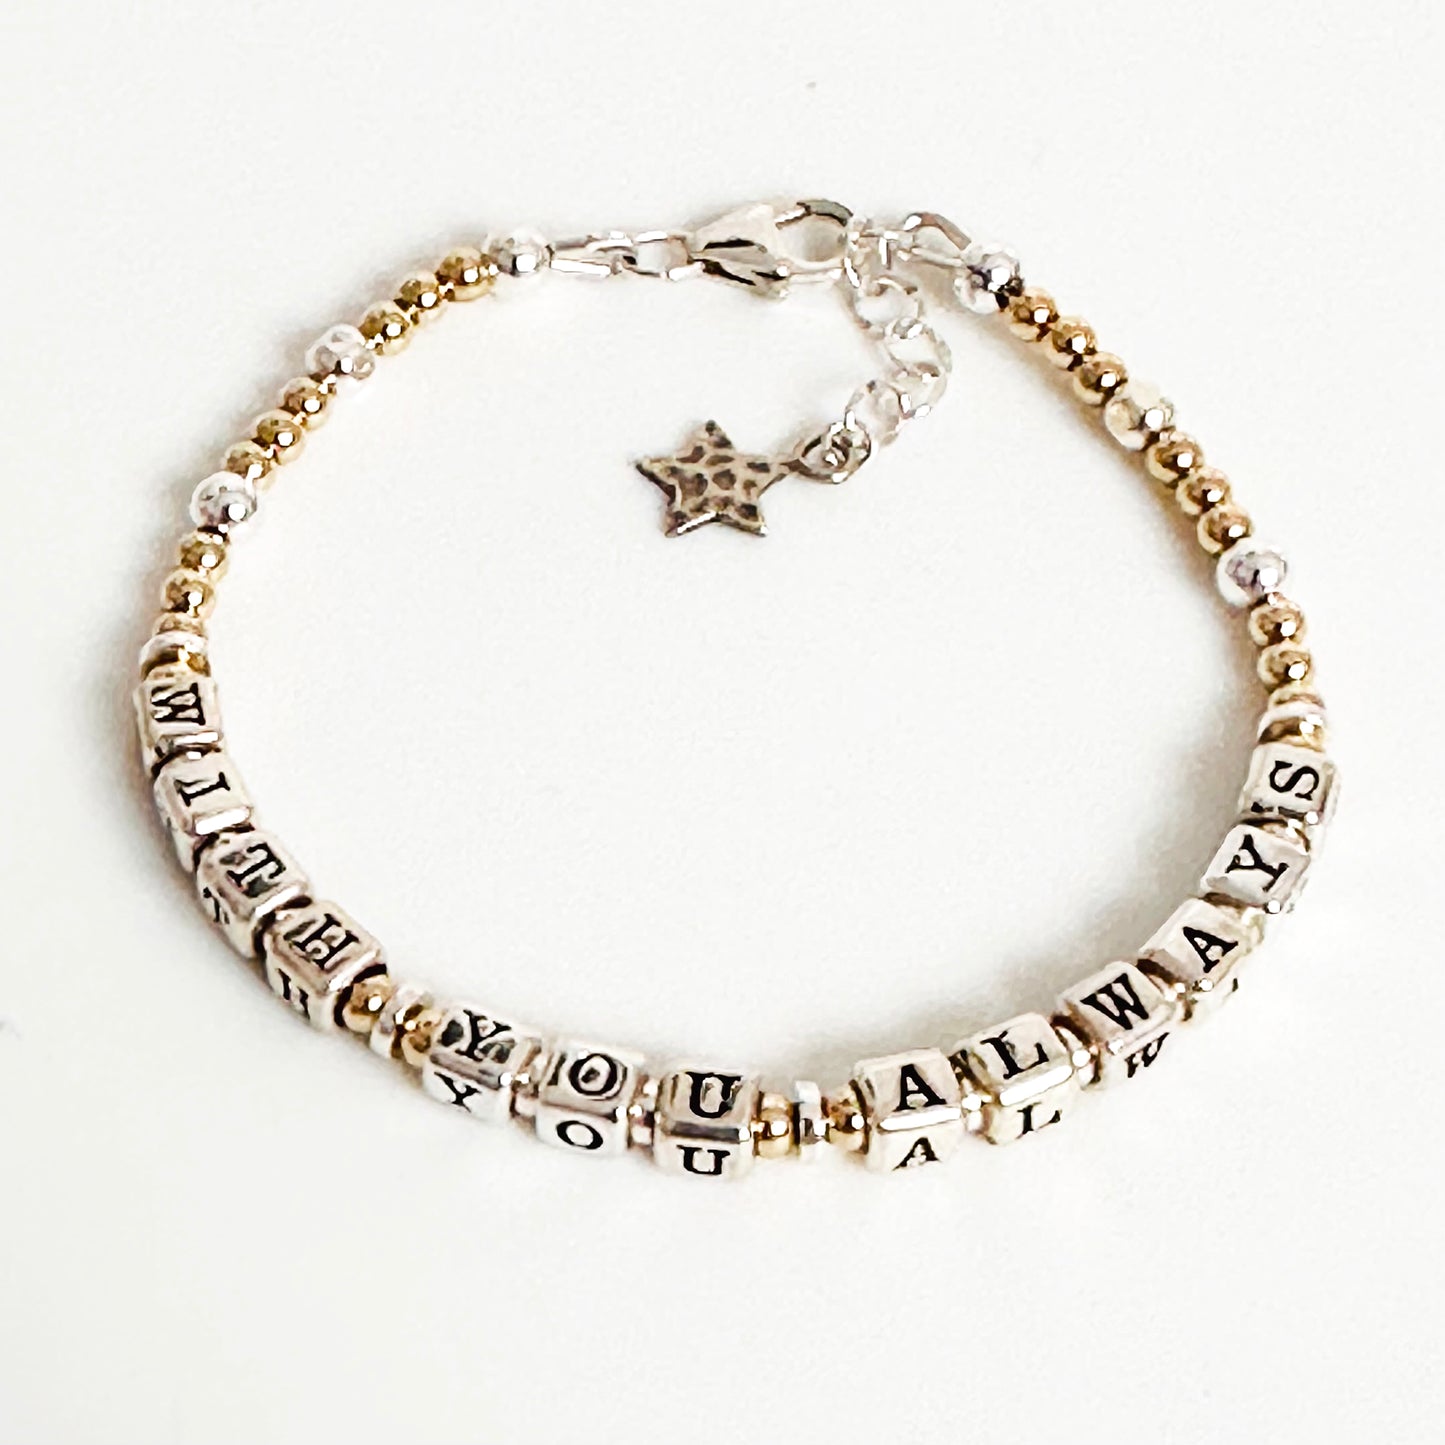 Sympathy Gift Bracelet "With You Always" in Mixed Metals, Sterling, 14k Gold